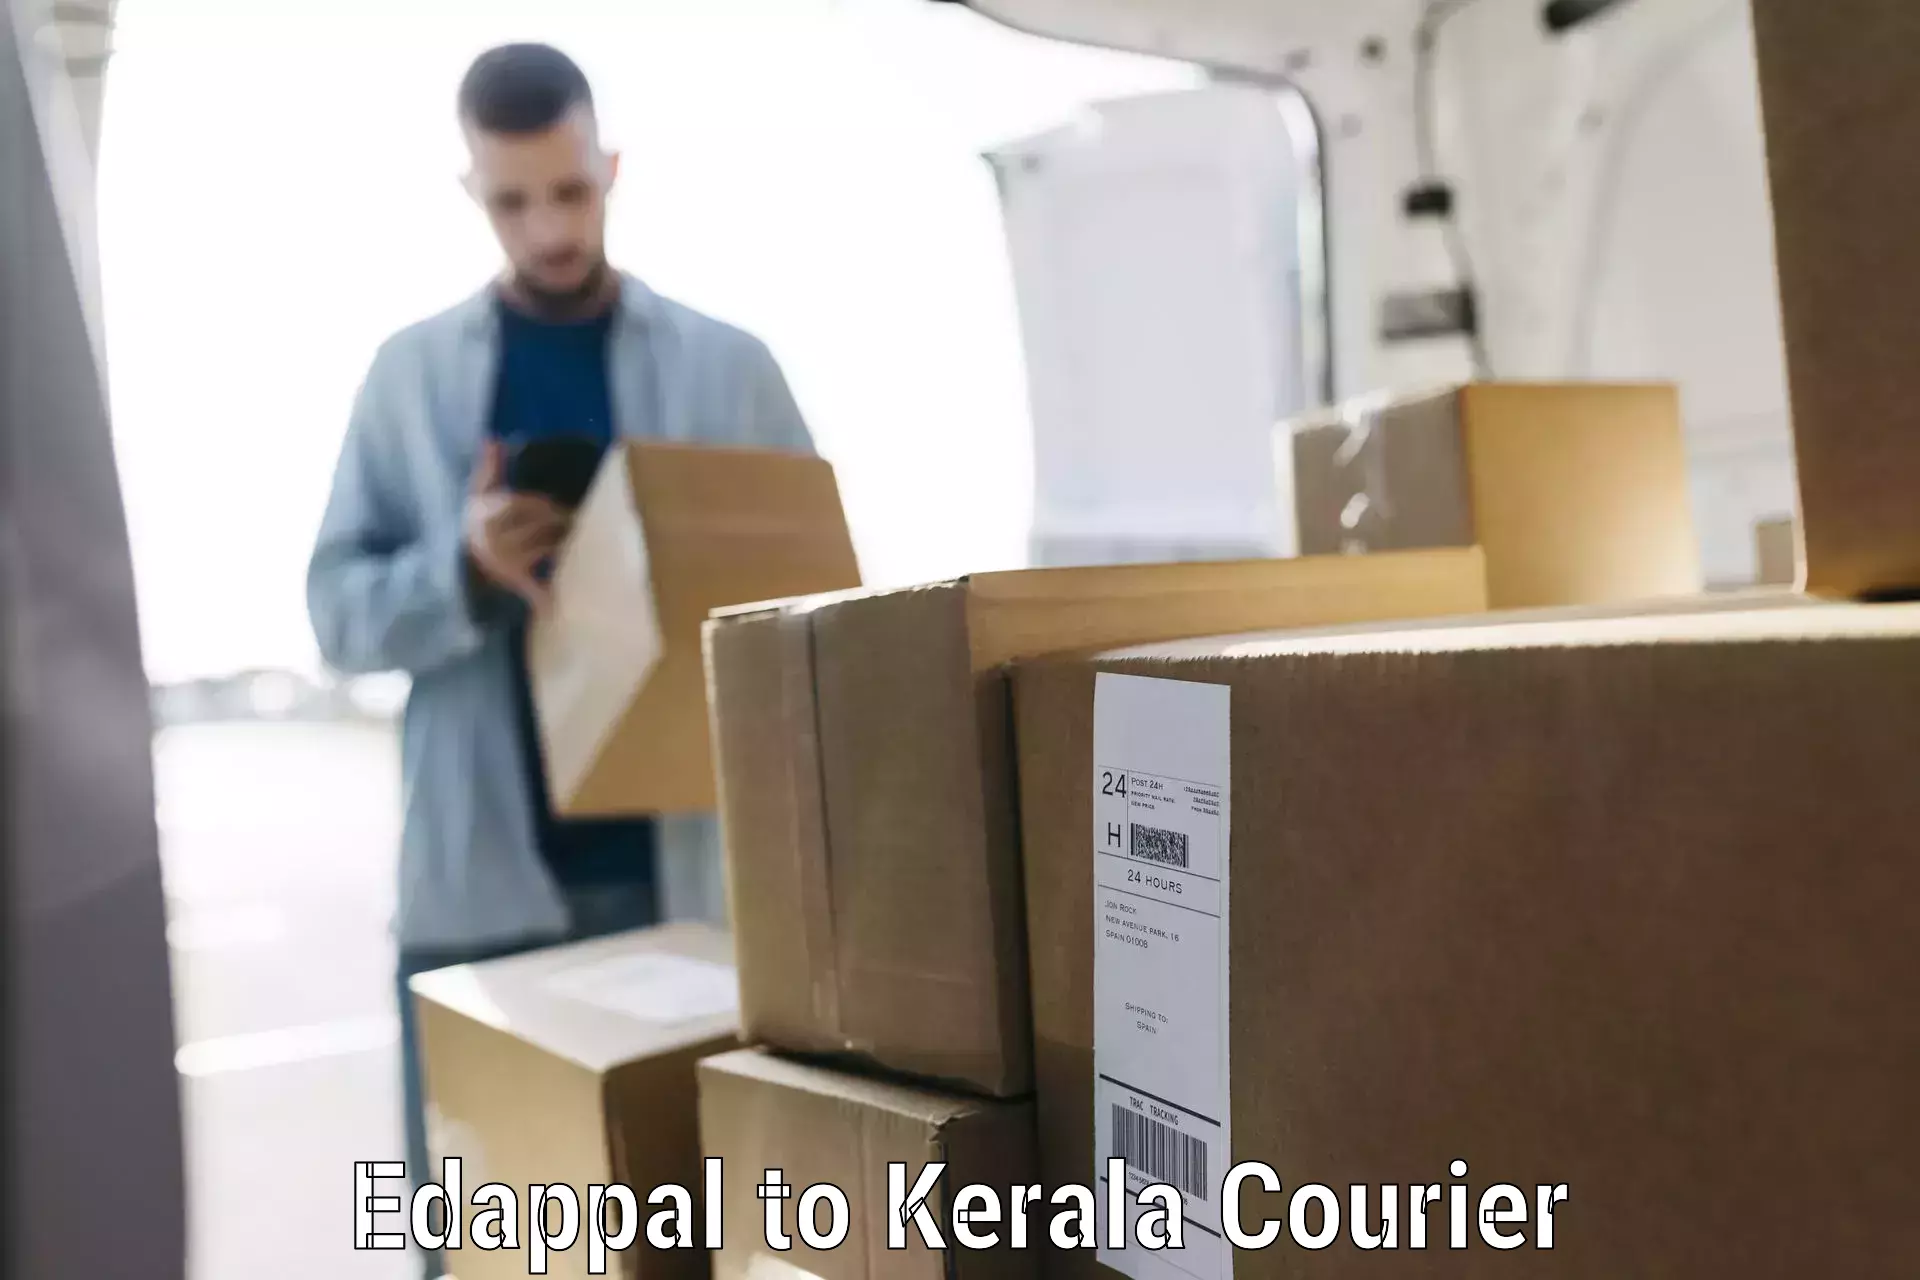 Instant baggage transport quote Edappal to Koothattukulam